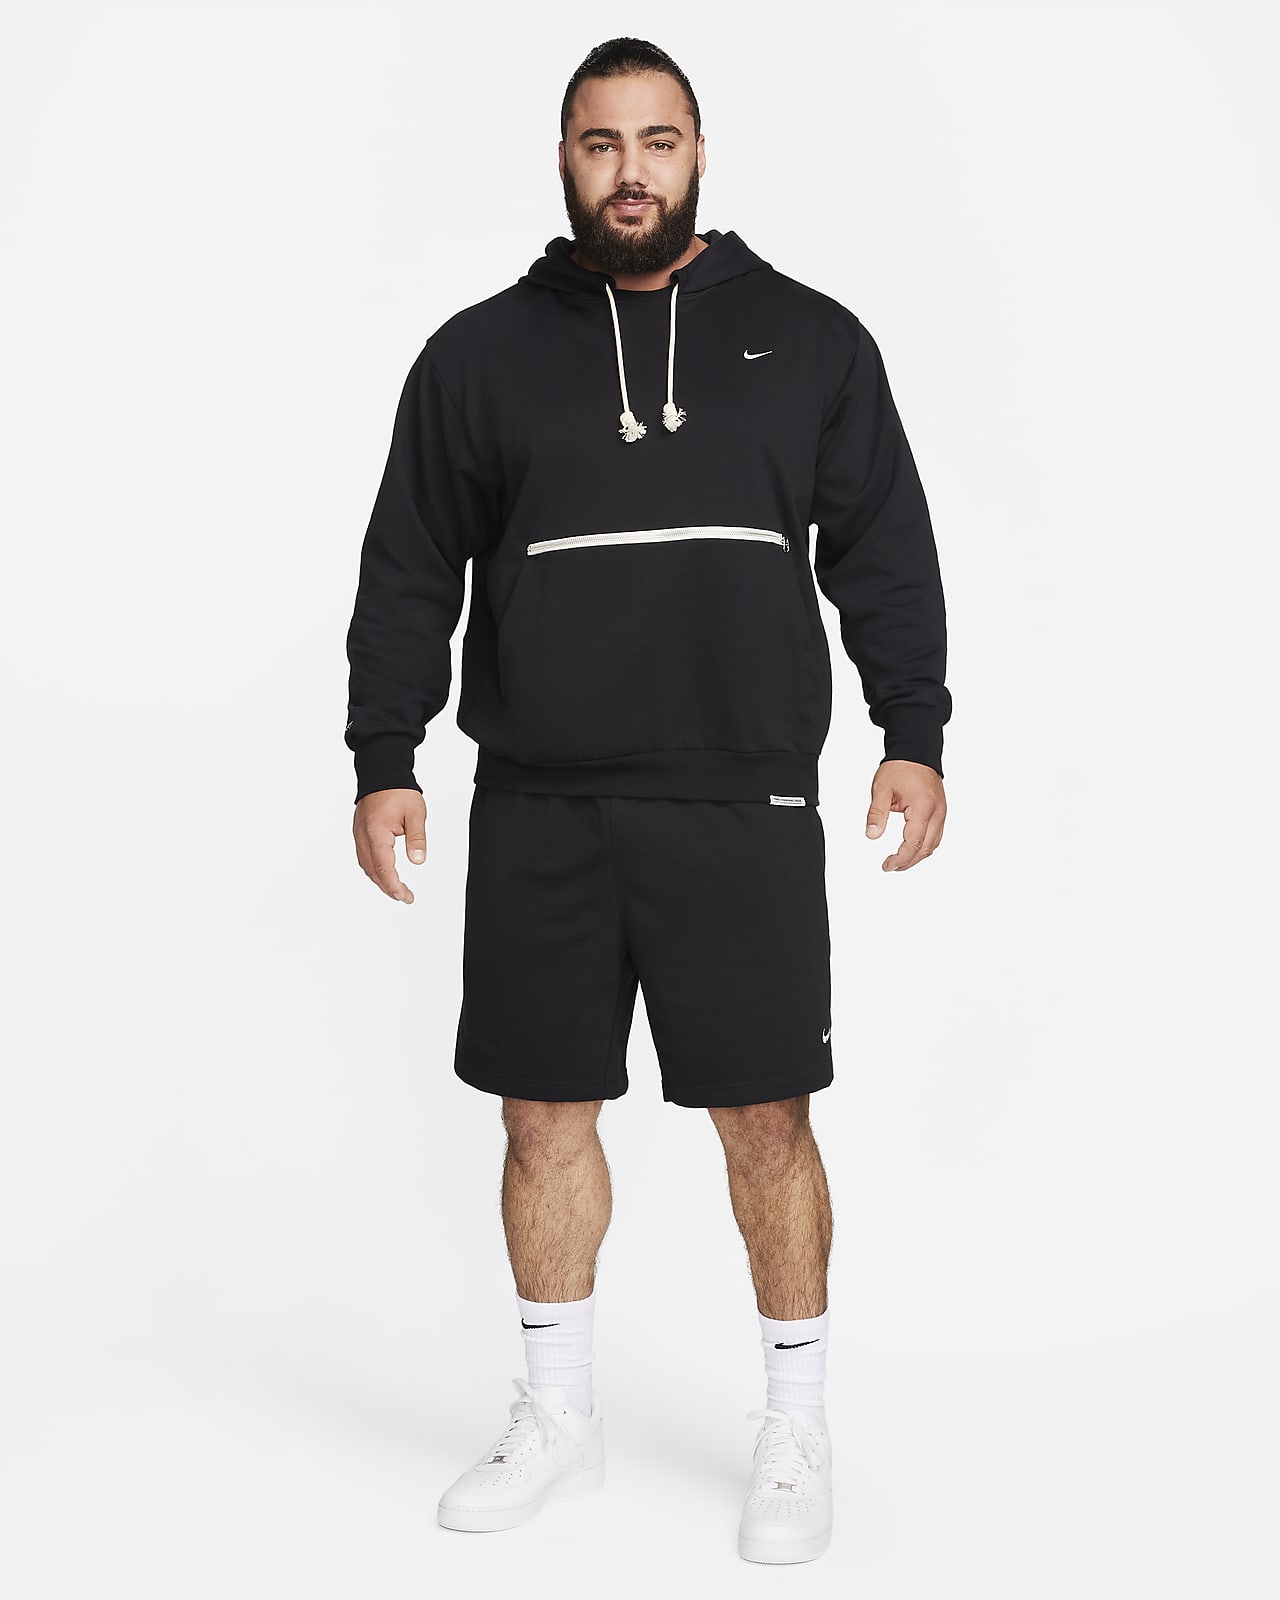 https://static.nike.com/a/images/t_PDP_1280_v1/f_auto,q_auto:eco/30fdceea-5f26-413e-b6fd-e2ce996c1e6c/dri-fit-standard-issue-mens-8-french-terry-basketball-shorts-Q0lBst.png